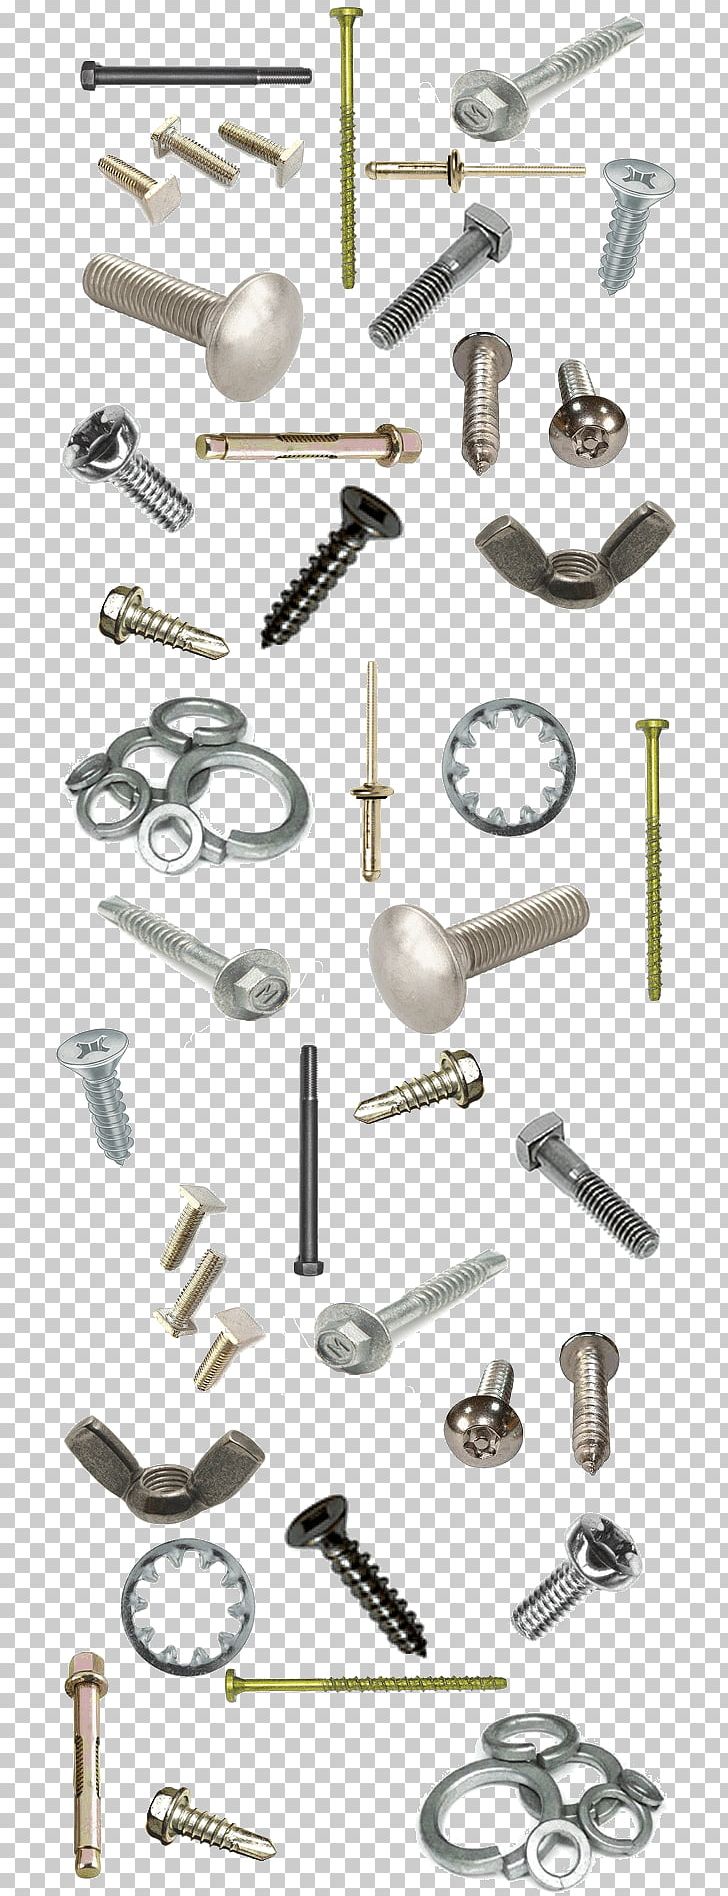 Fastener Bolt Nut Screw Threaded Rod PNG, Clipart, Acorn Nut, Anchor Bolt, Angle, Augers, Bolt Free PNG Download